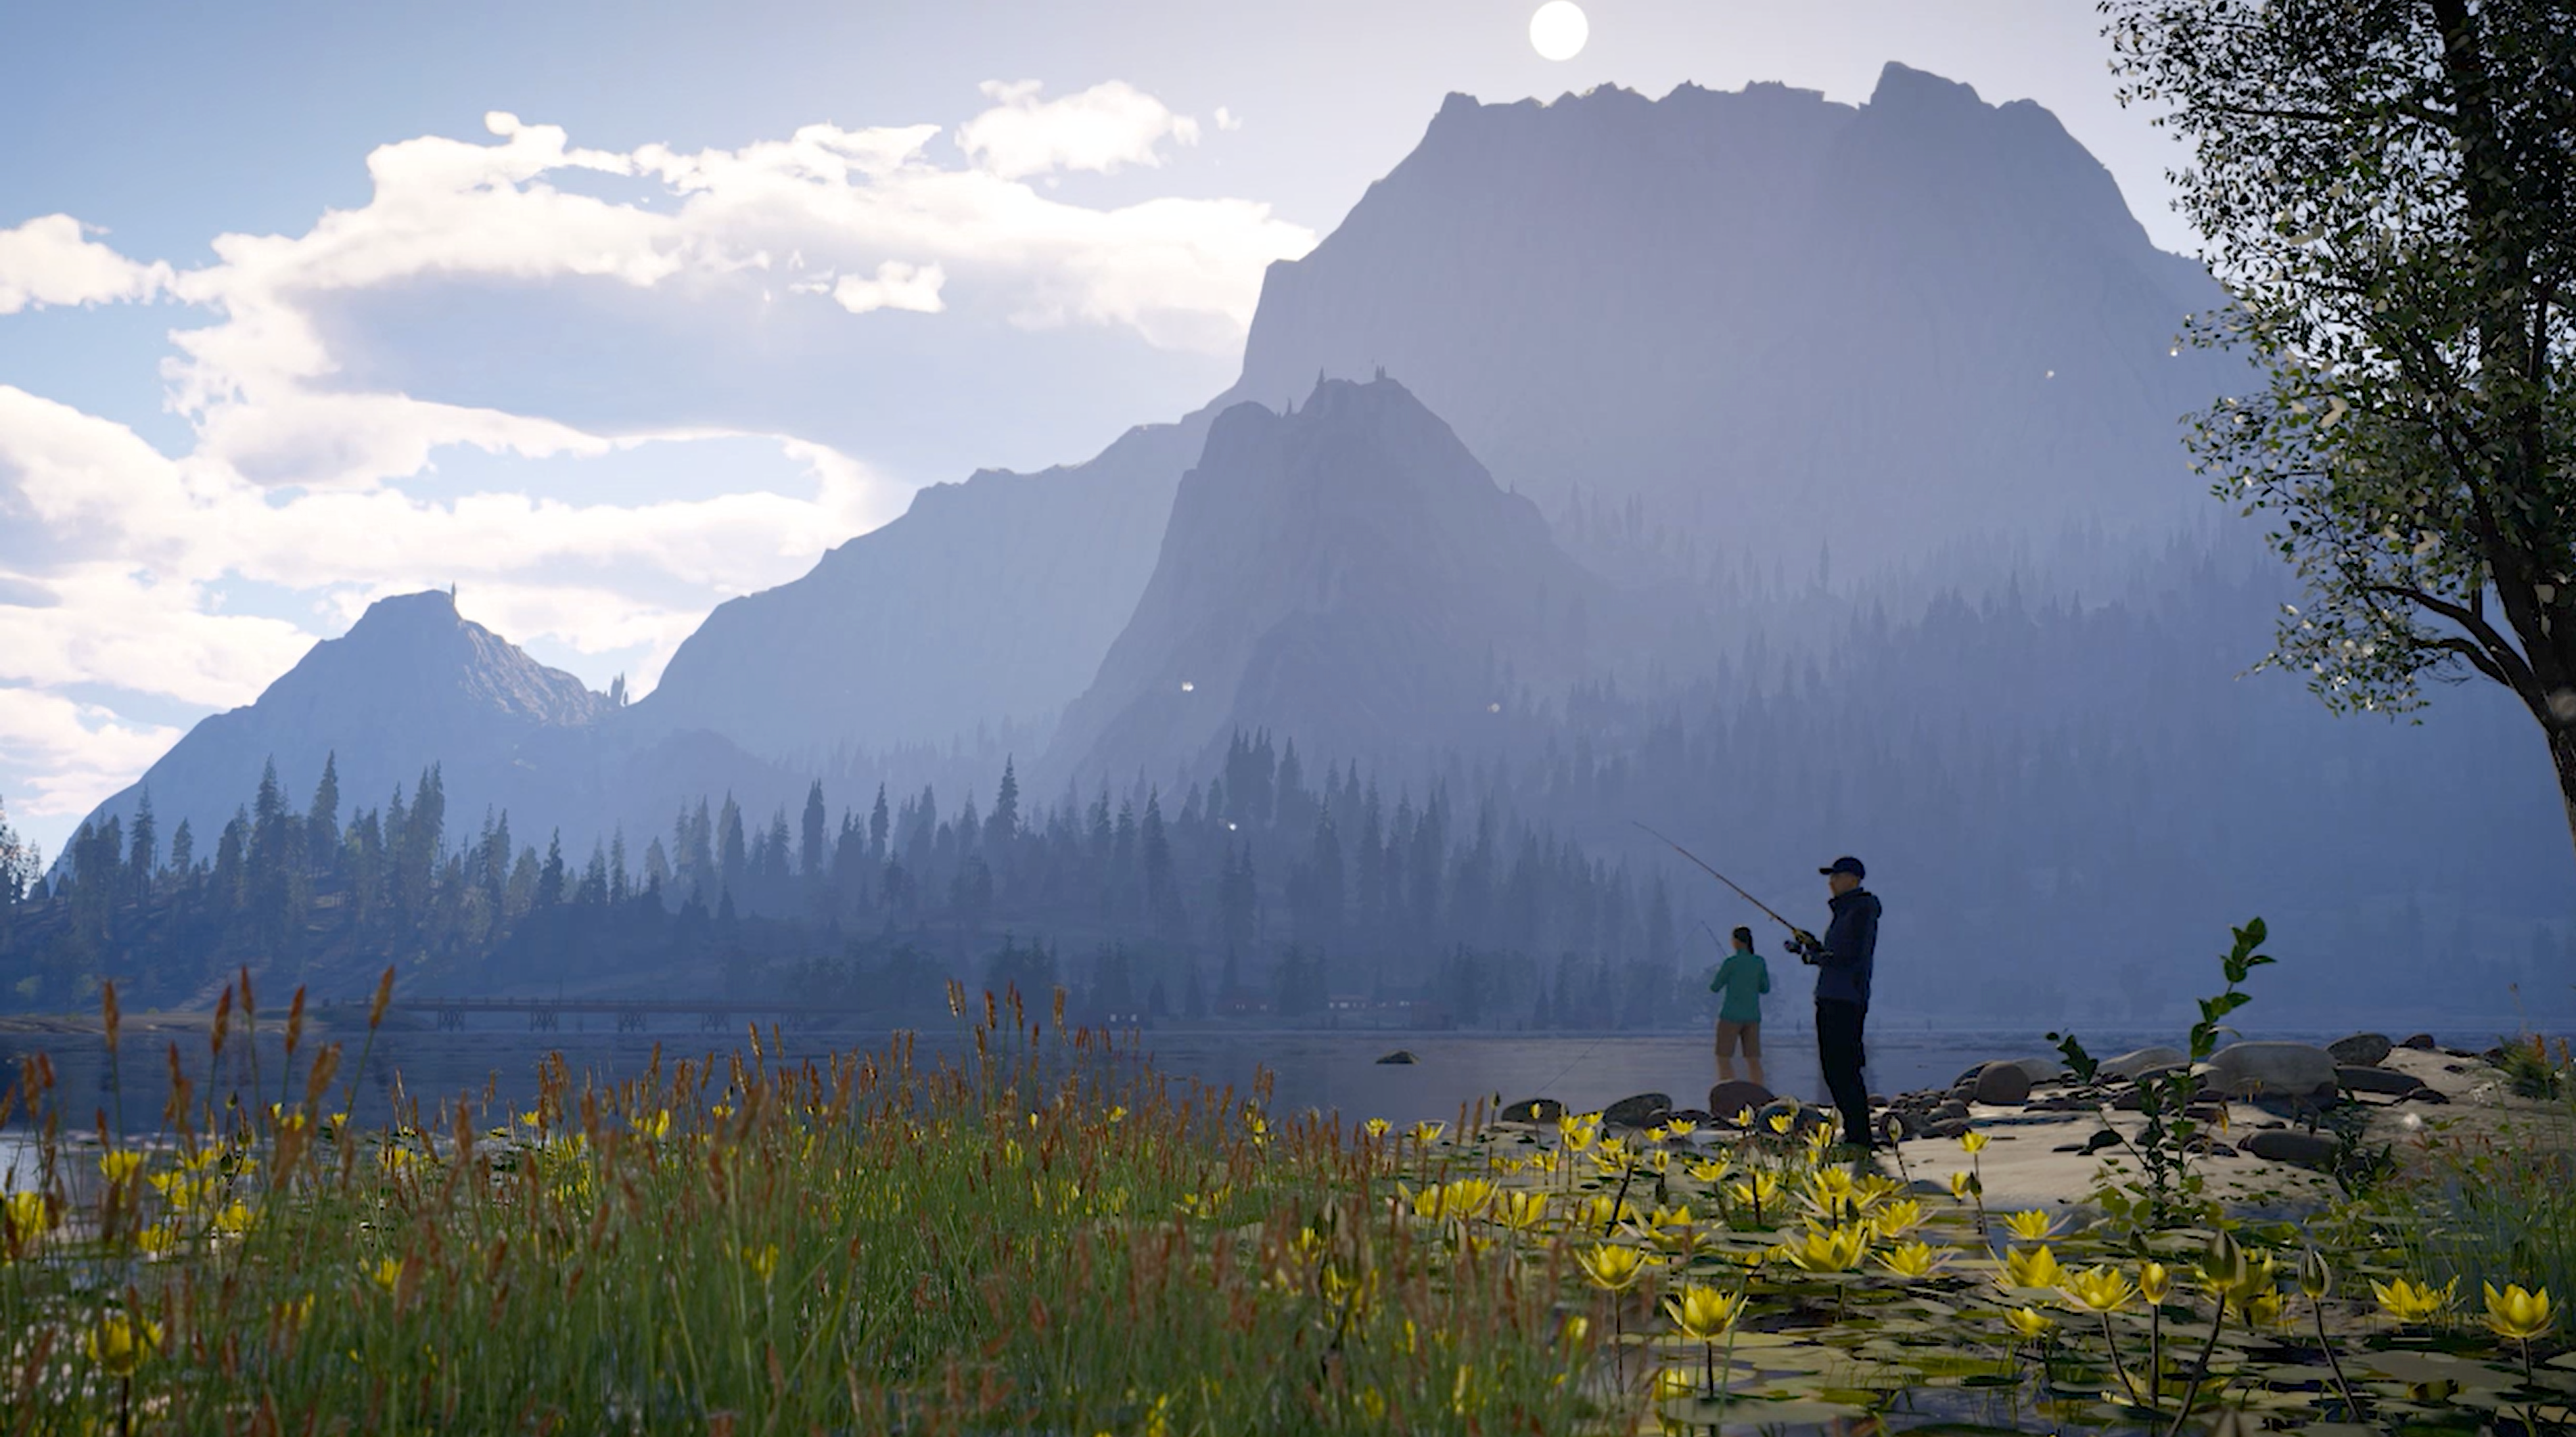 Two players fishing by a large body of water overlooking a mountainous vista.